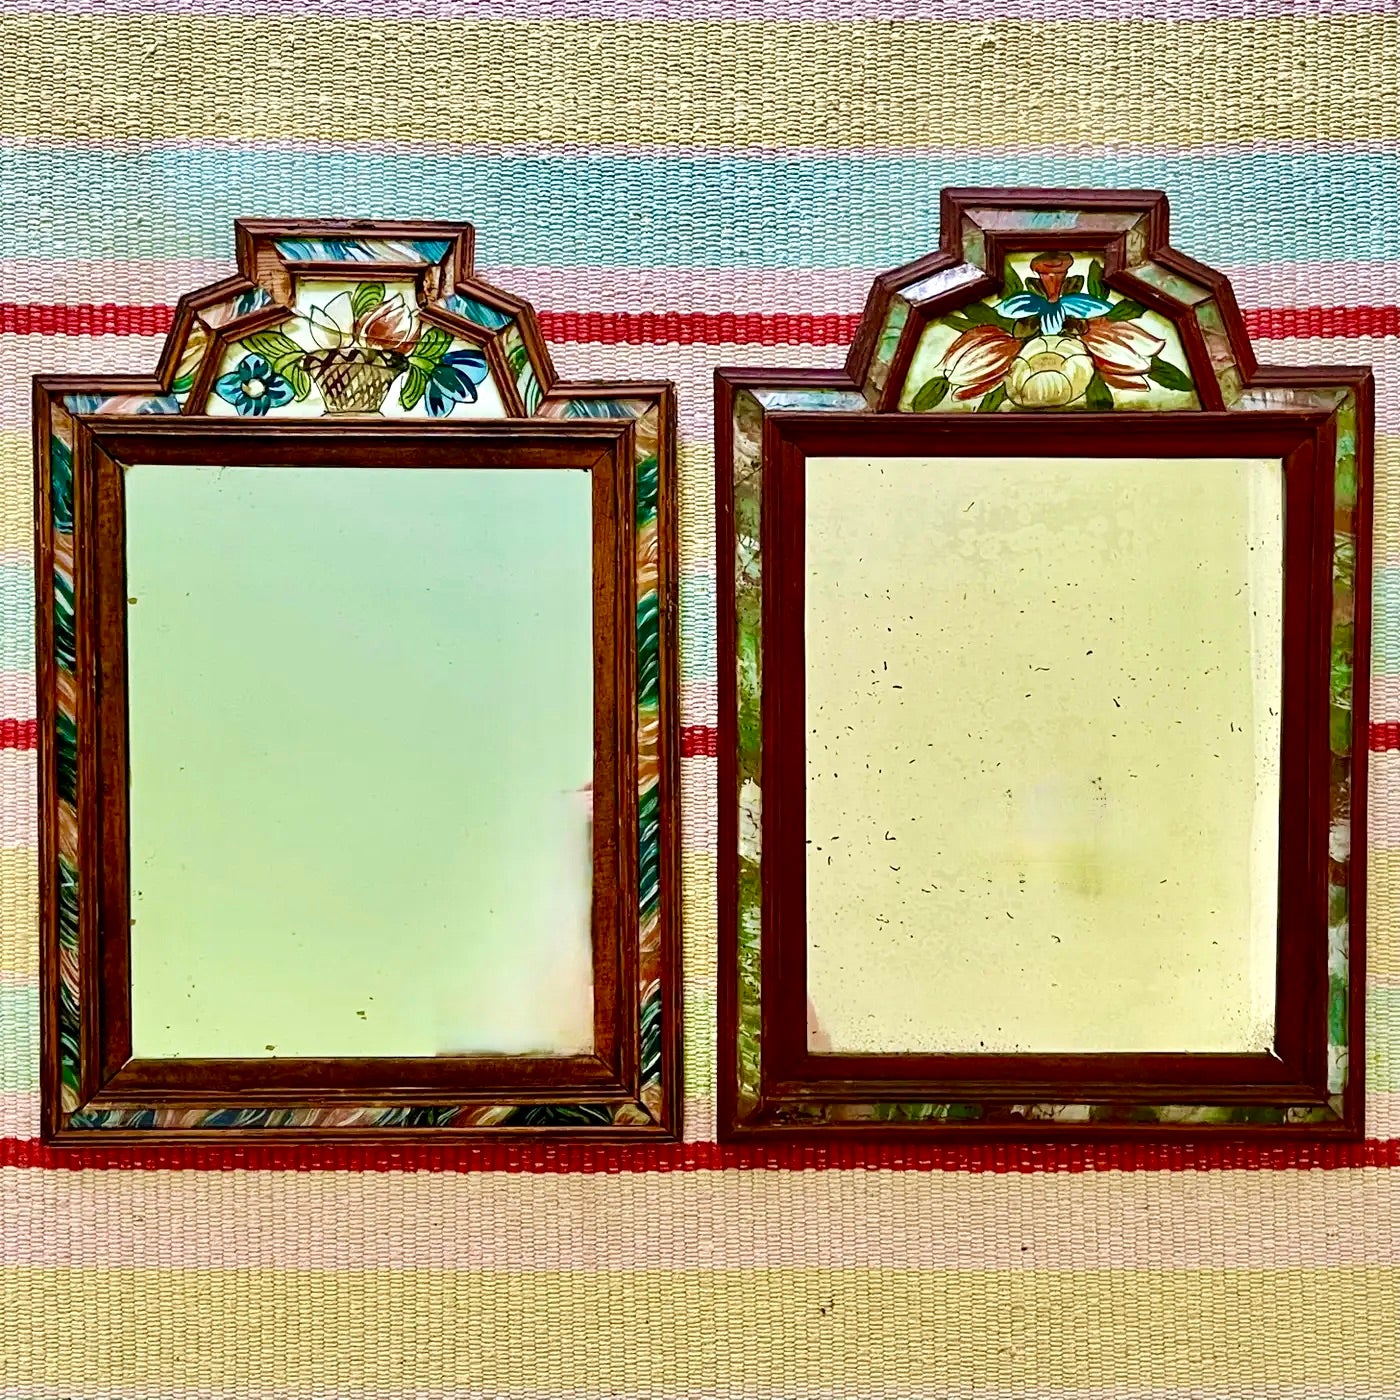 A pair of European wood and reverse painted glass Courting Mirrors with floral motif crests and marbleized panels, circa 1780-1820.

Courting mirrors were given as a courting gift and often hung in hallways for last minute grooming. They are made of